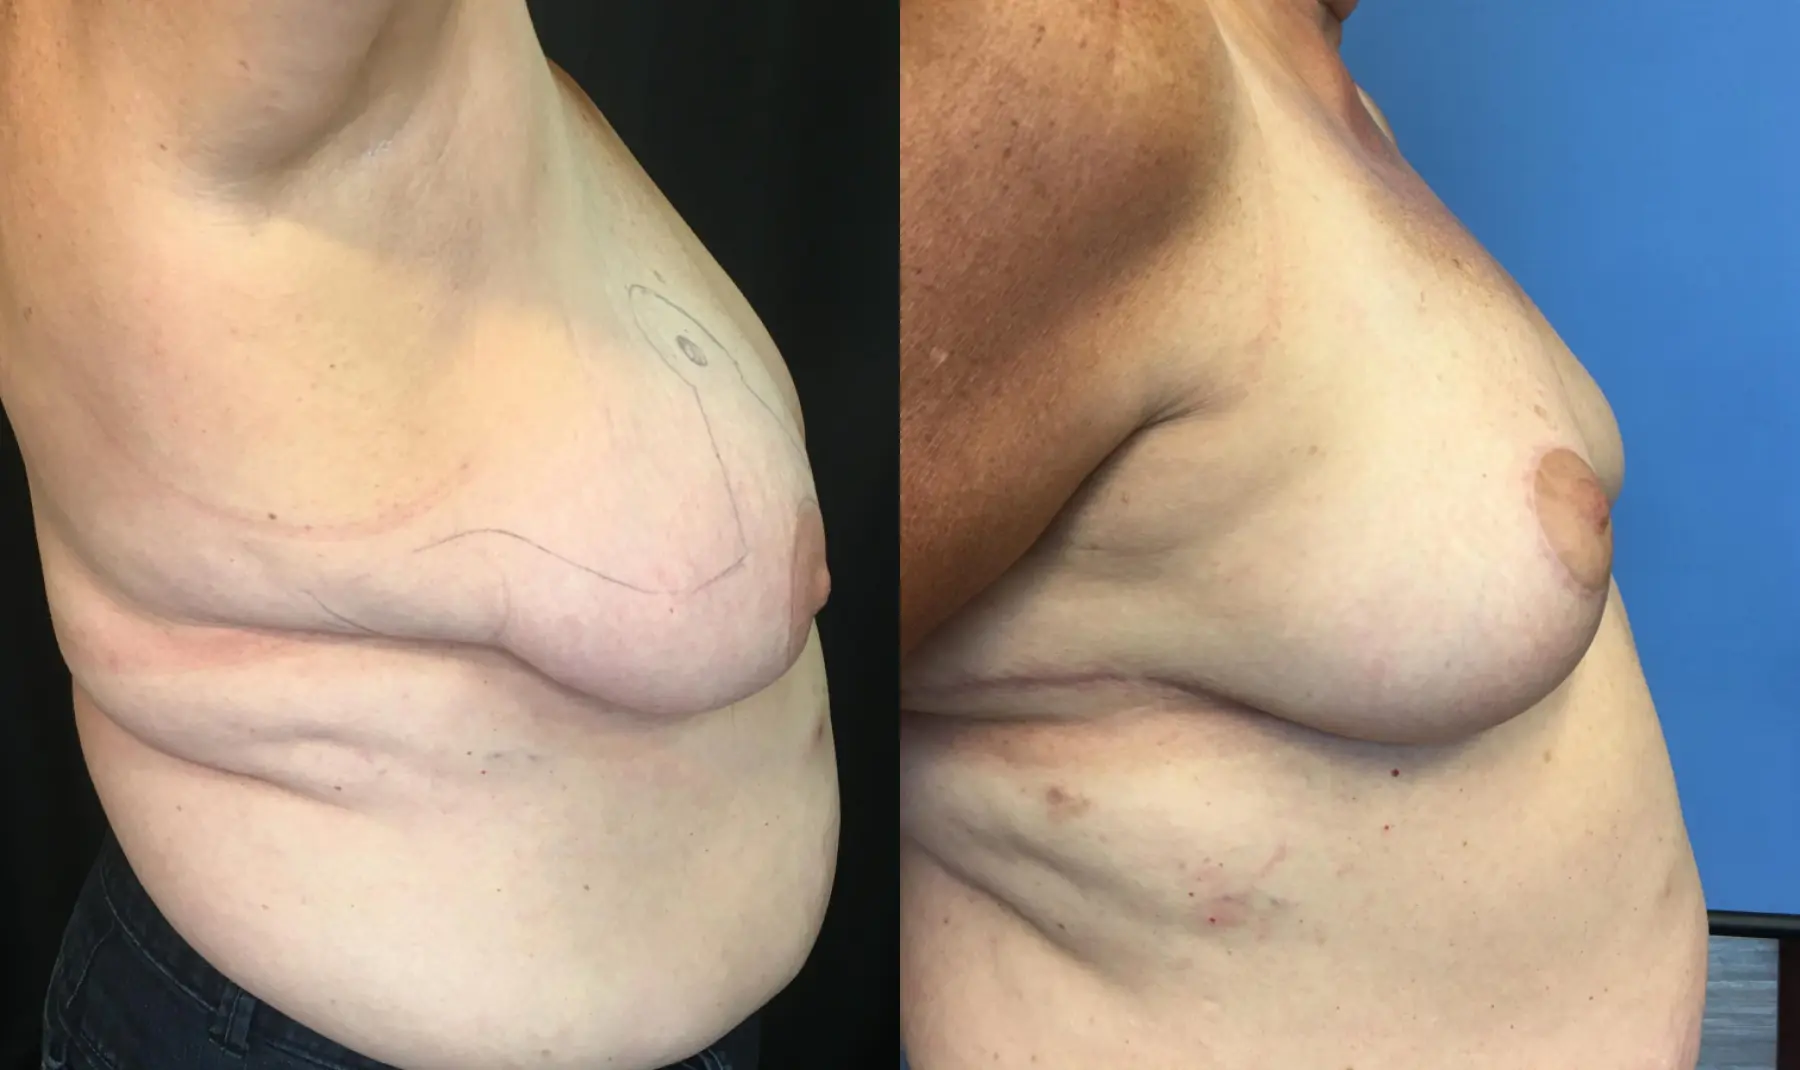 Breast Reduction: Patient 1 - Before and After 3